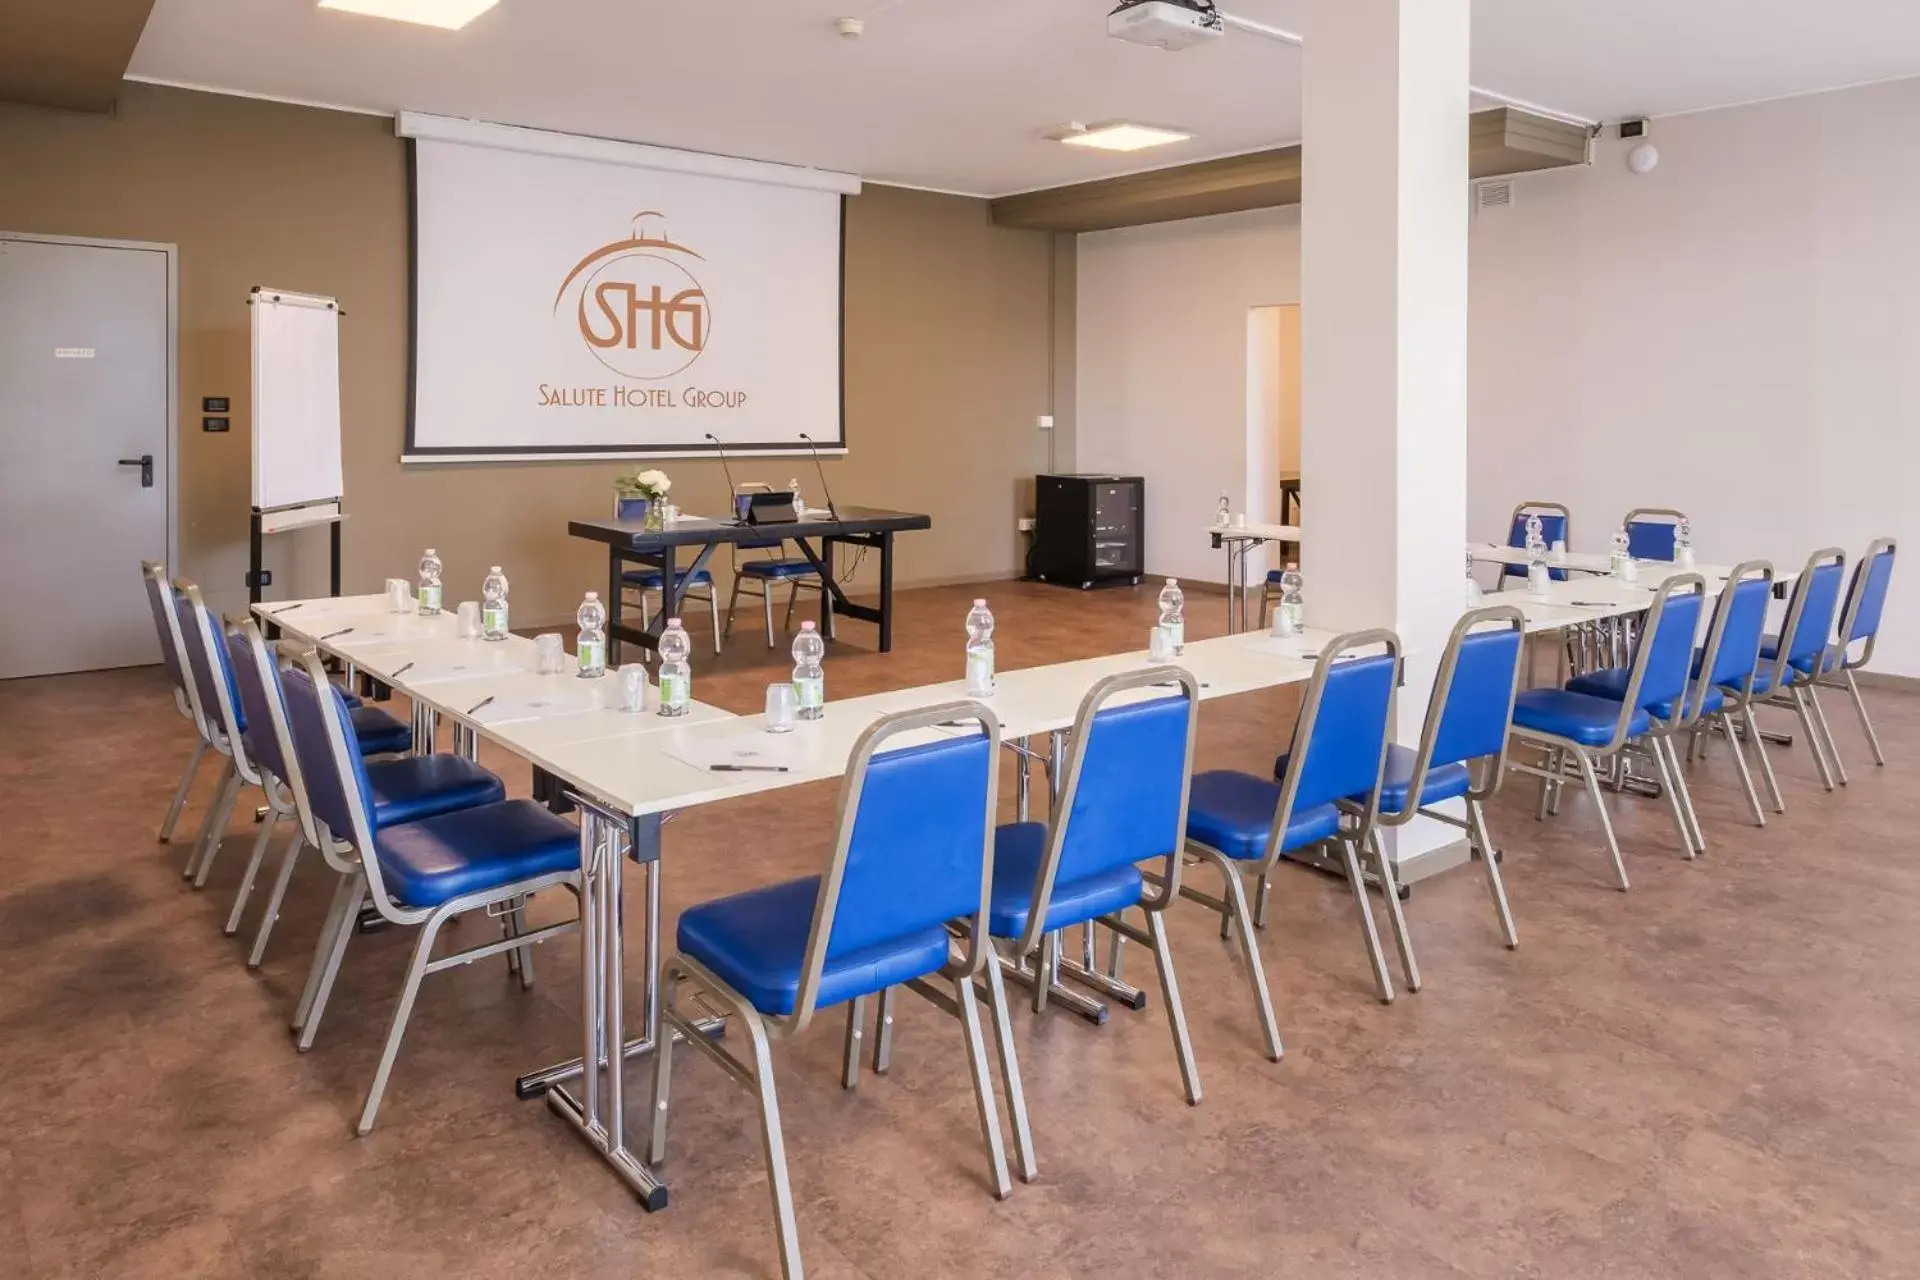 Meeting/conference room in SHG Hotel Bologna